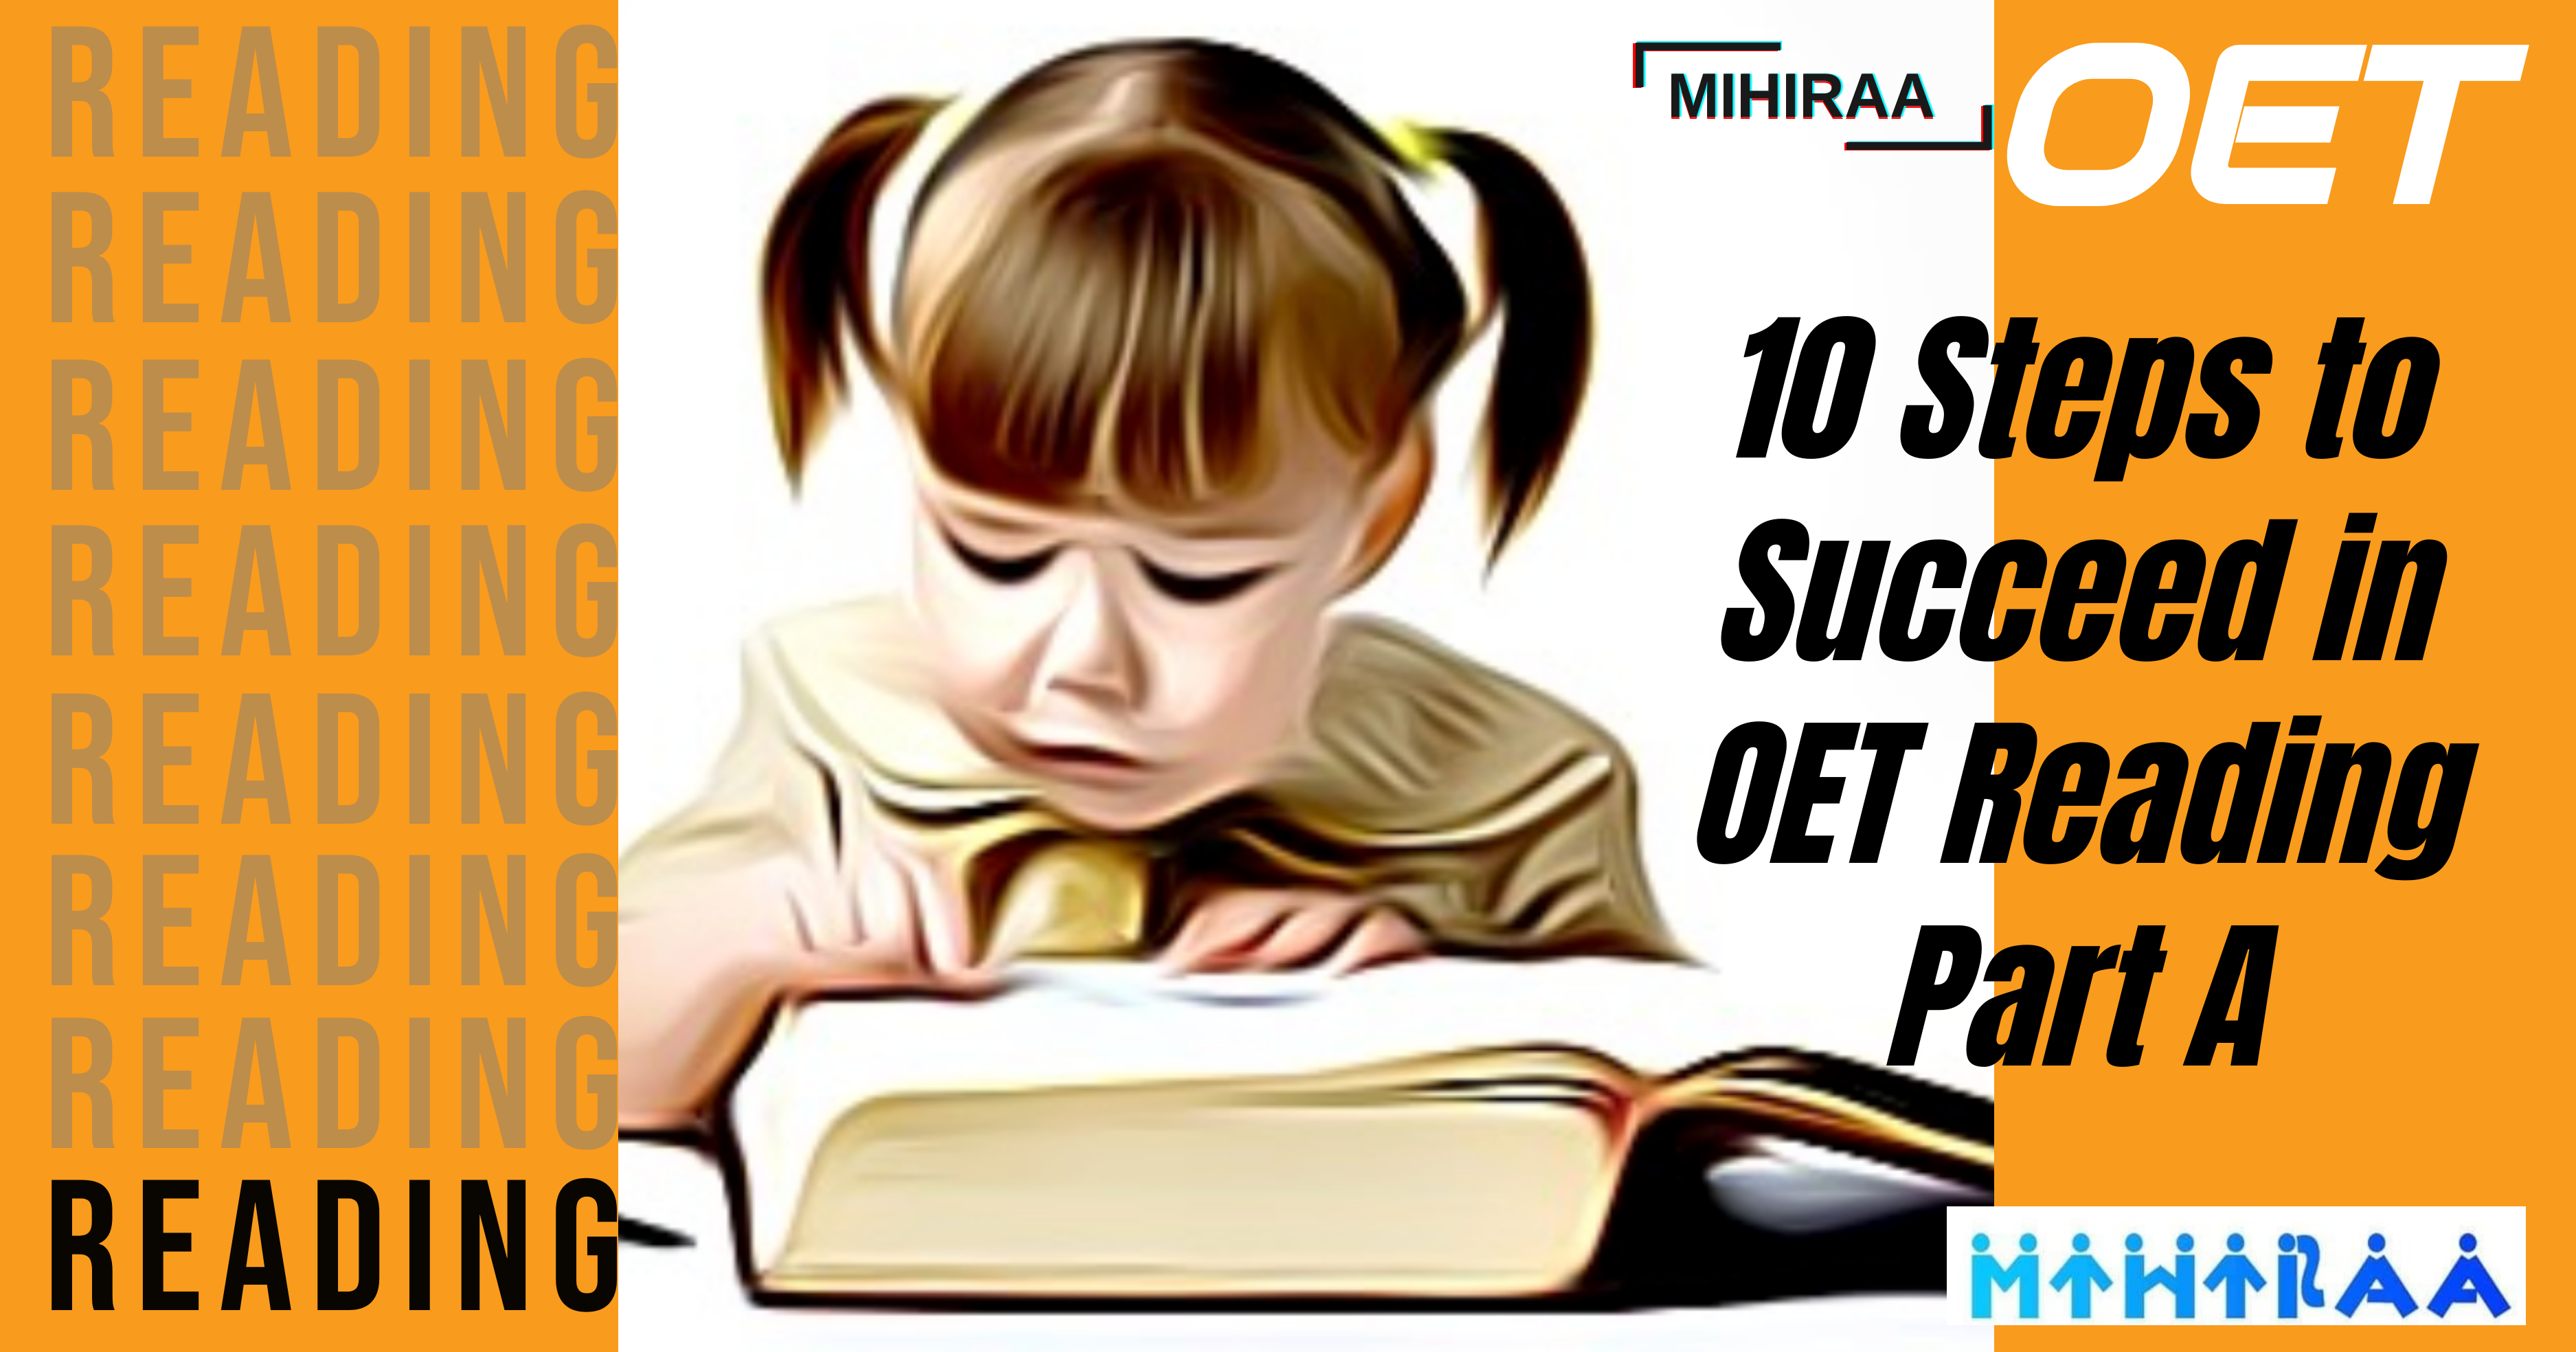 10 Steps to Succeed in OET Reading Part A - Mihiraa